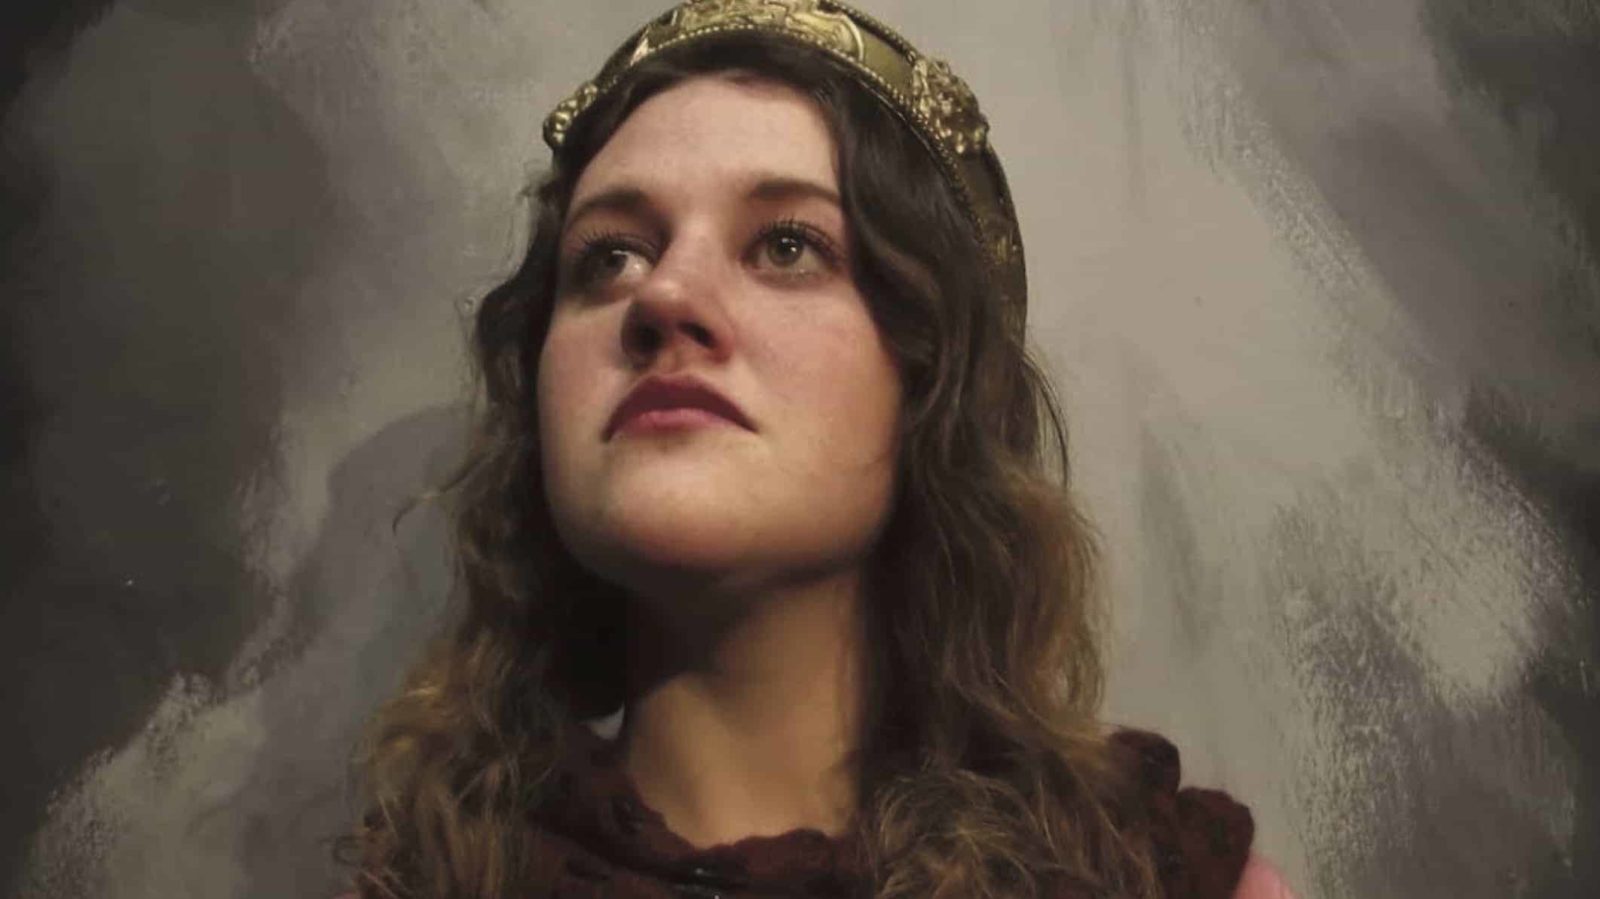 Crysta Cheverie played Henry V in a cast of women in an MCLA theater production in November 2016.